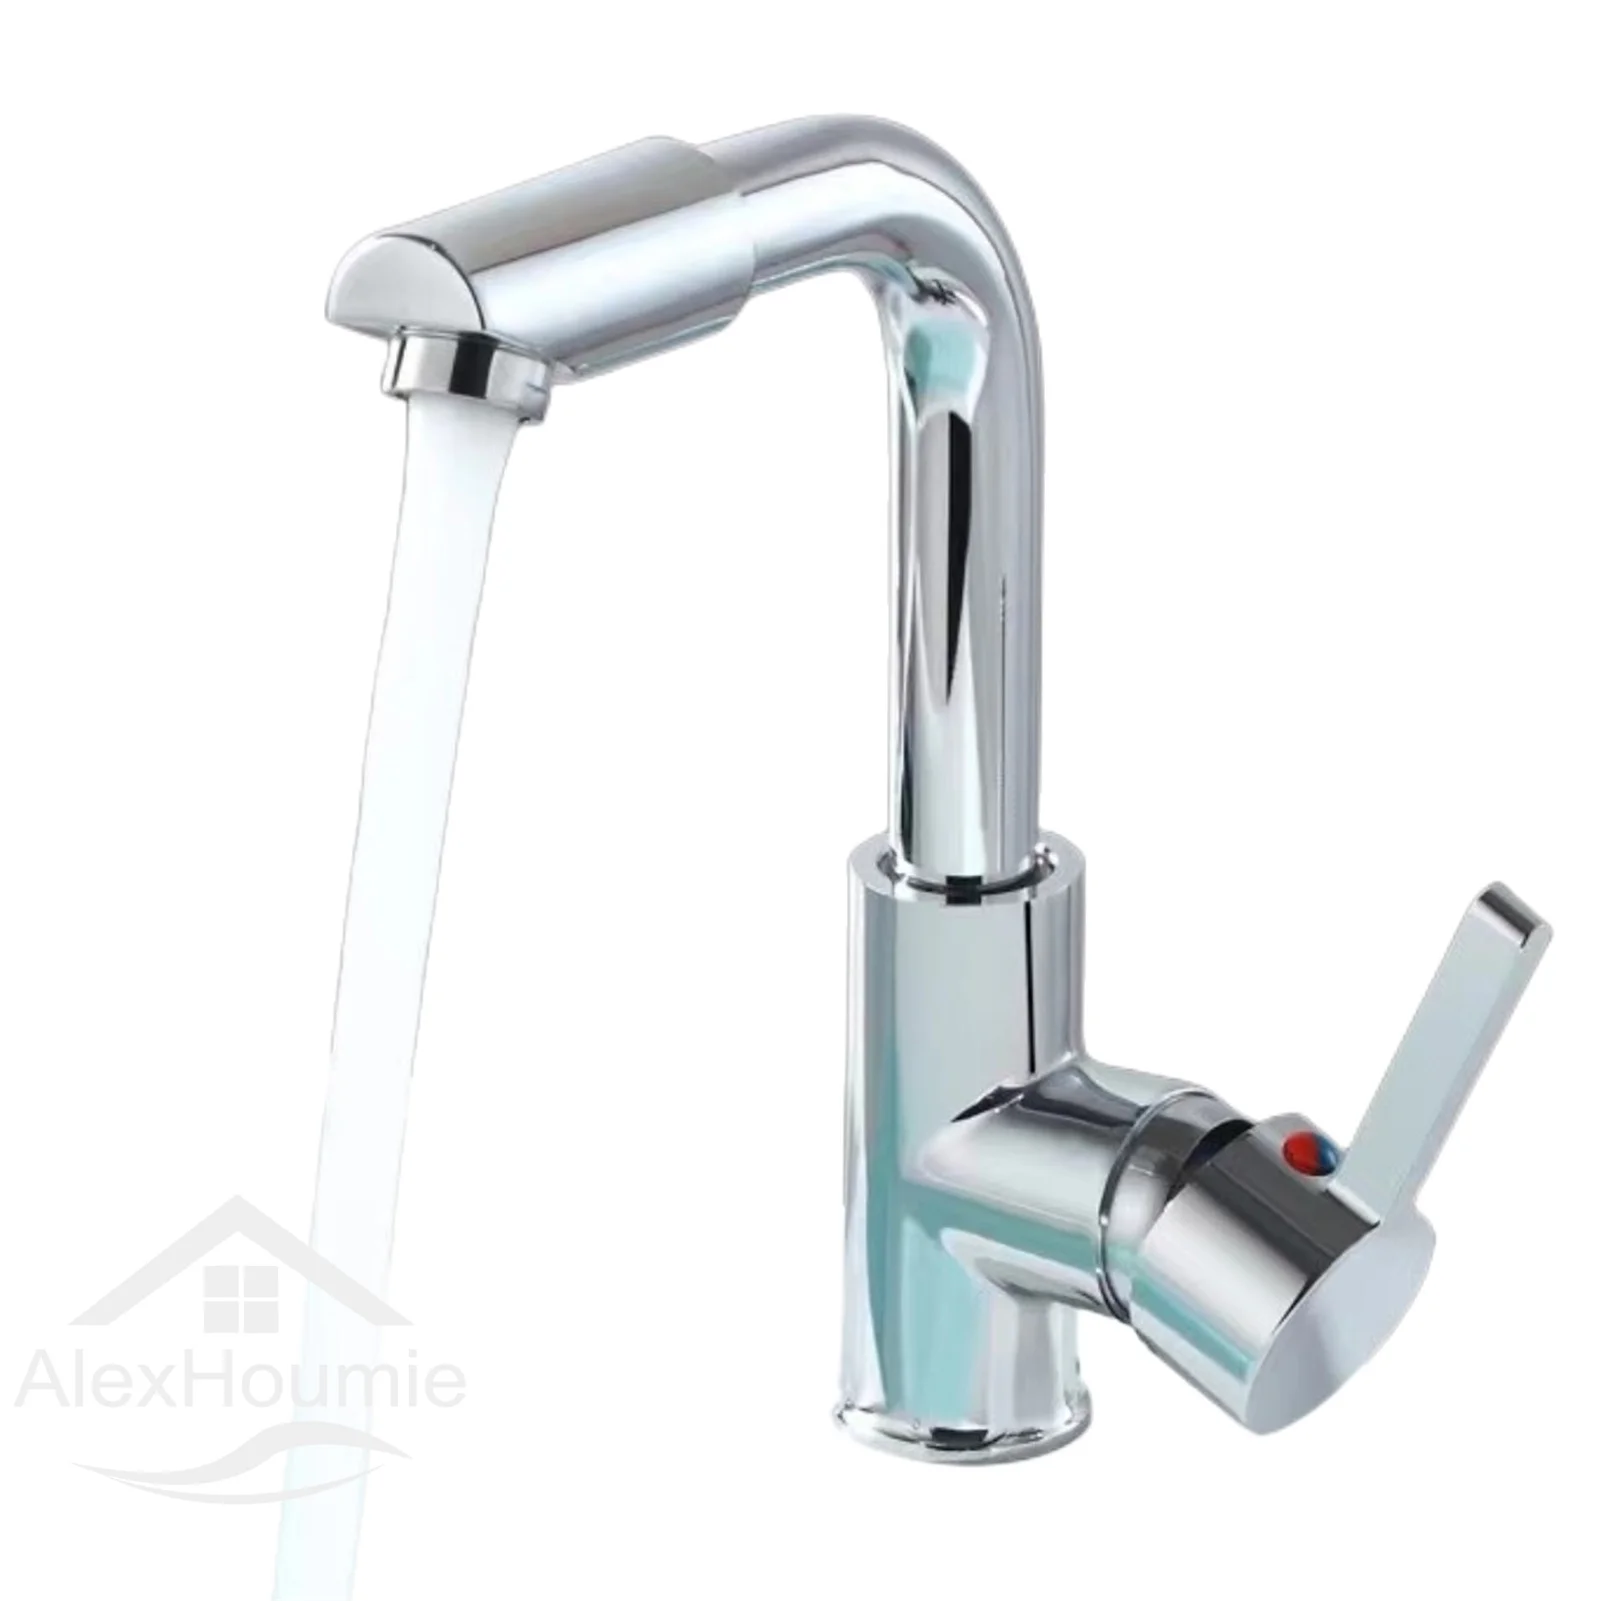 Bathroom Basin Faucets Cold and Hot Water Mixer Basin Sink Tap Chrome Water Kitchen Faucet Bathroom Vessel Sink Tap